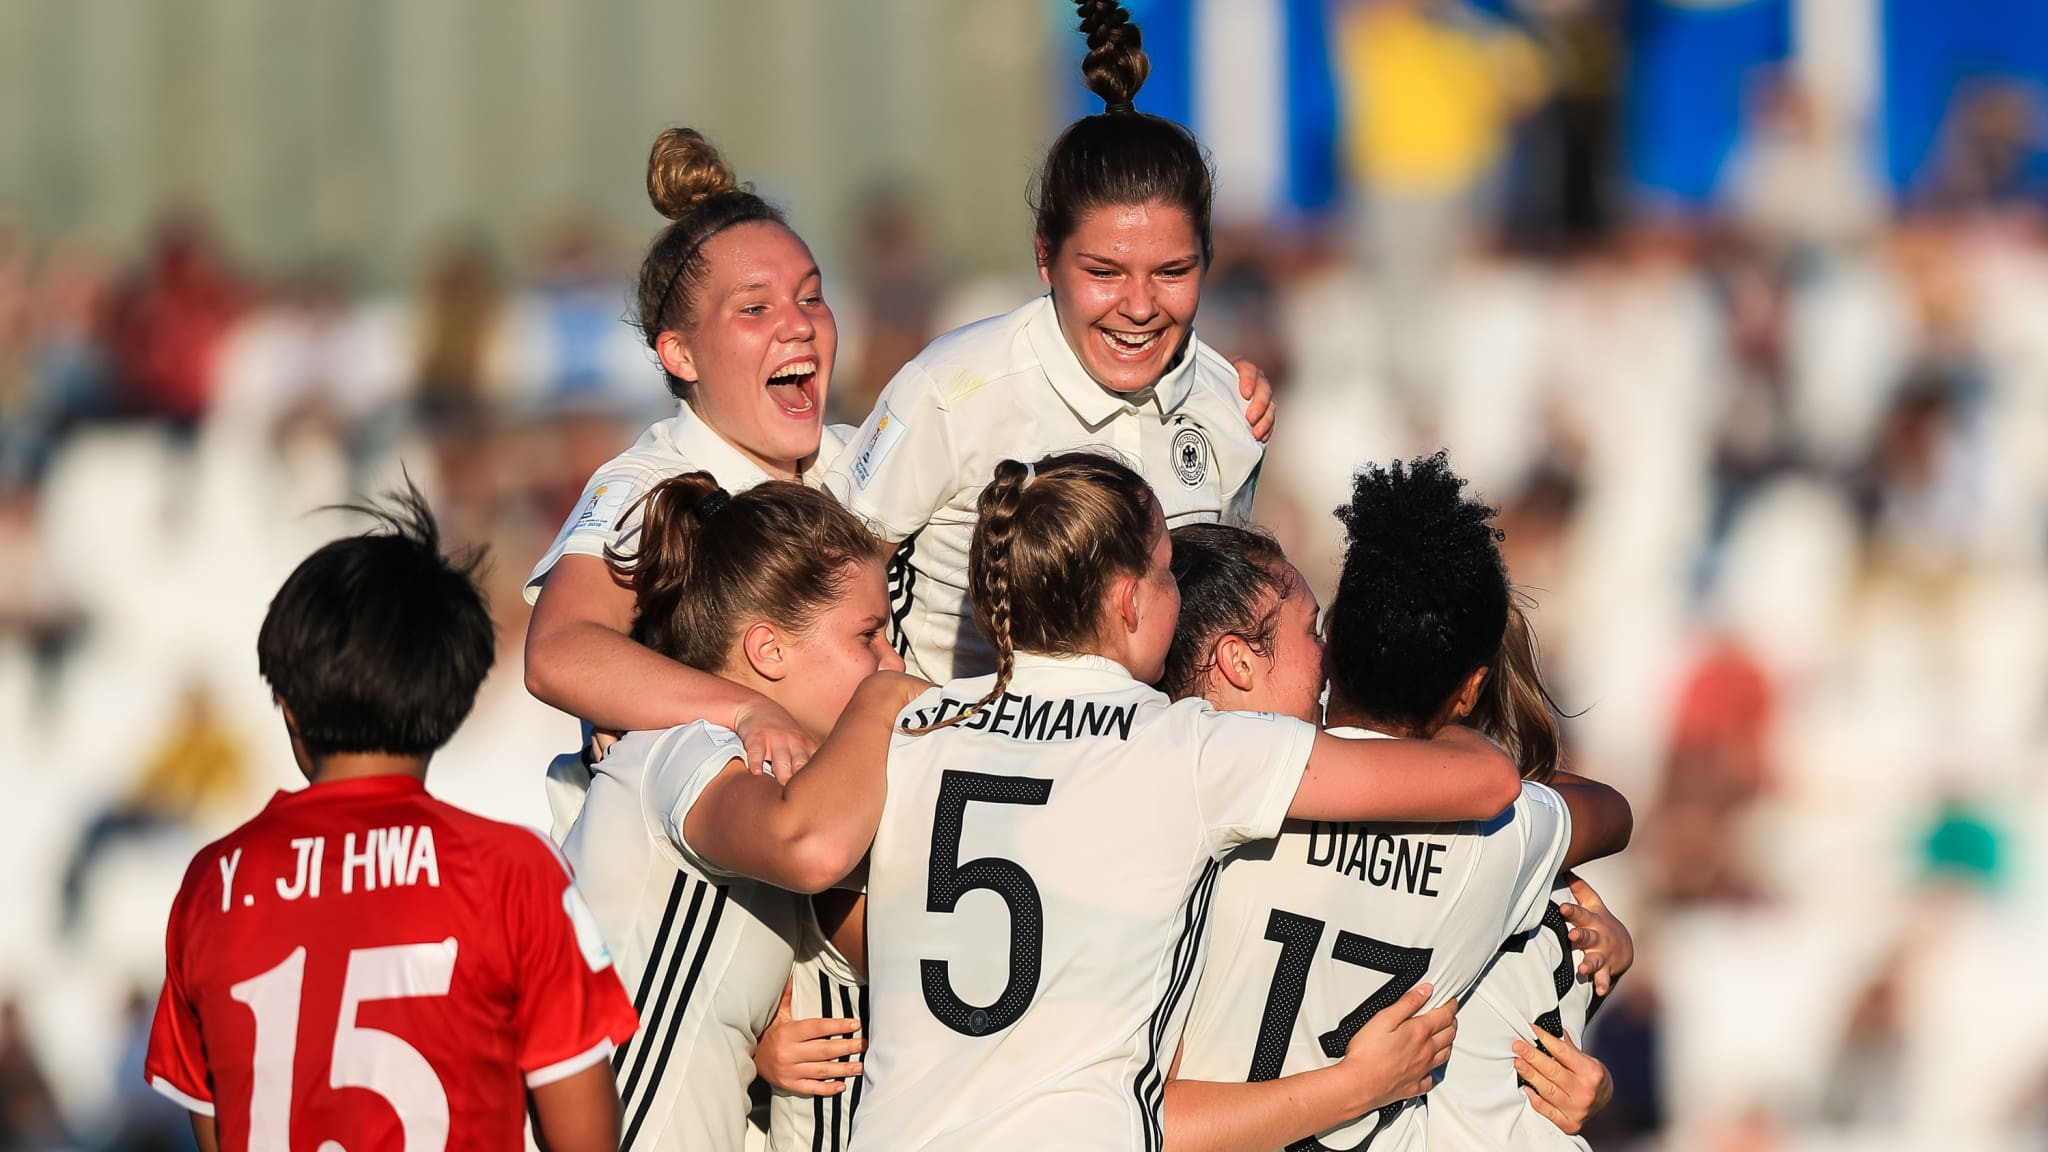 Germany beat defending champions as group stages continue in FIFA under-17 Women’s World Cup